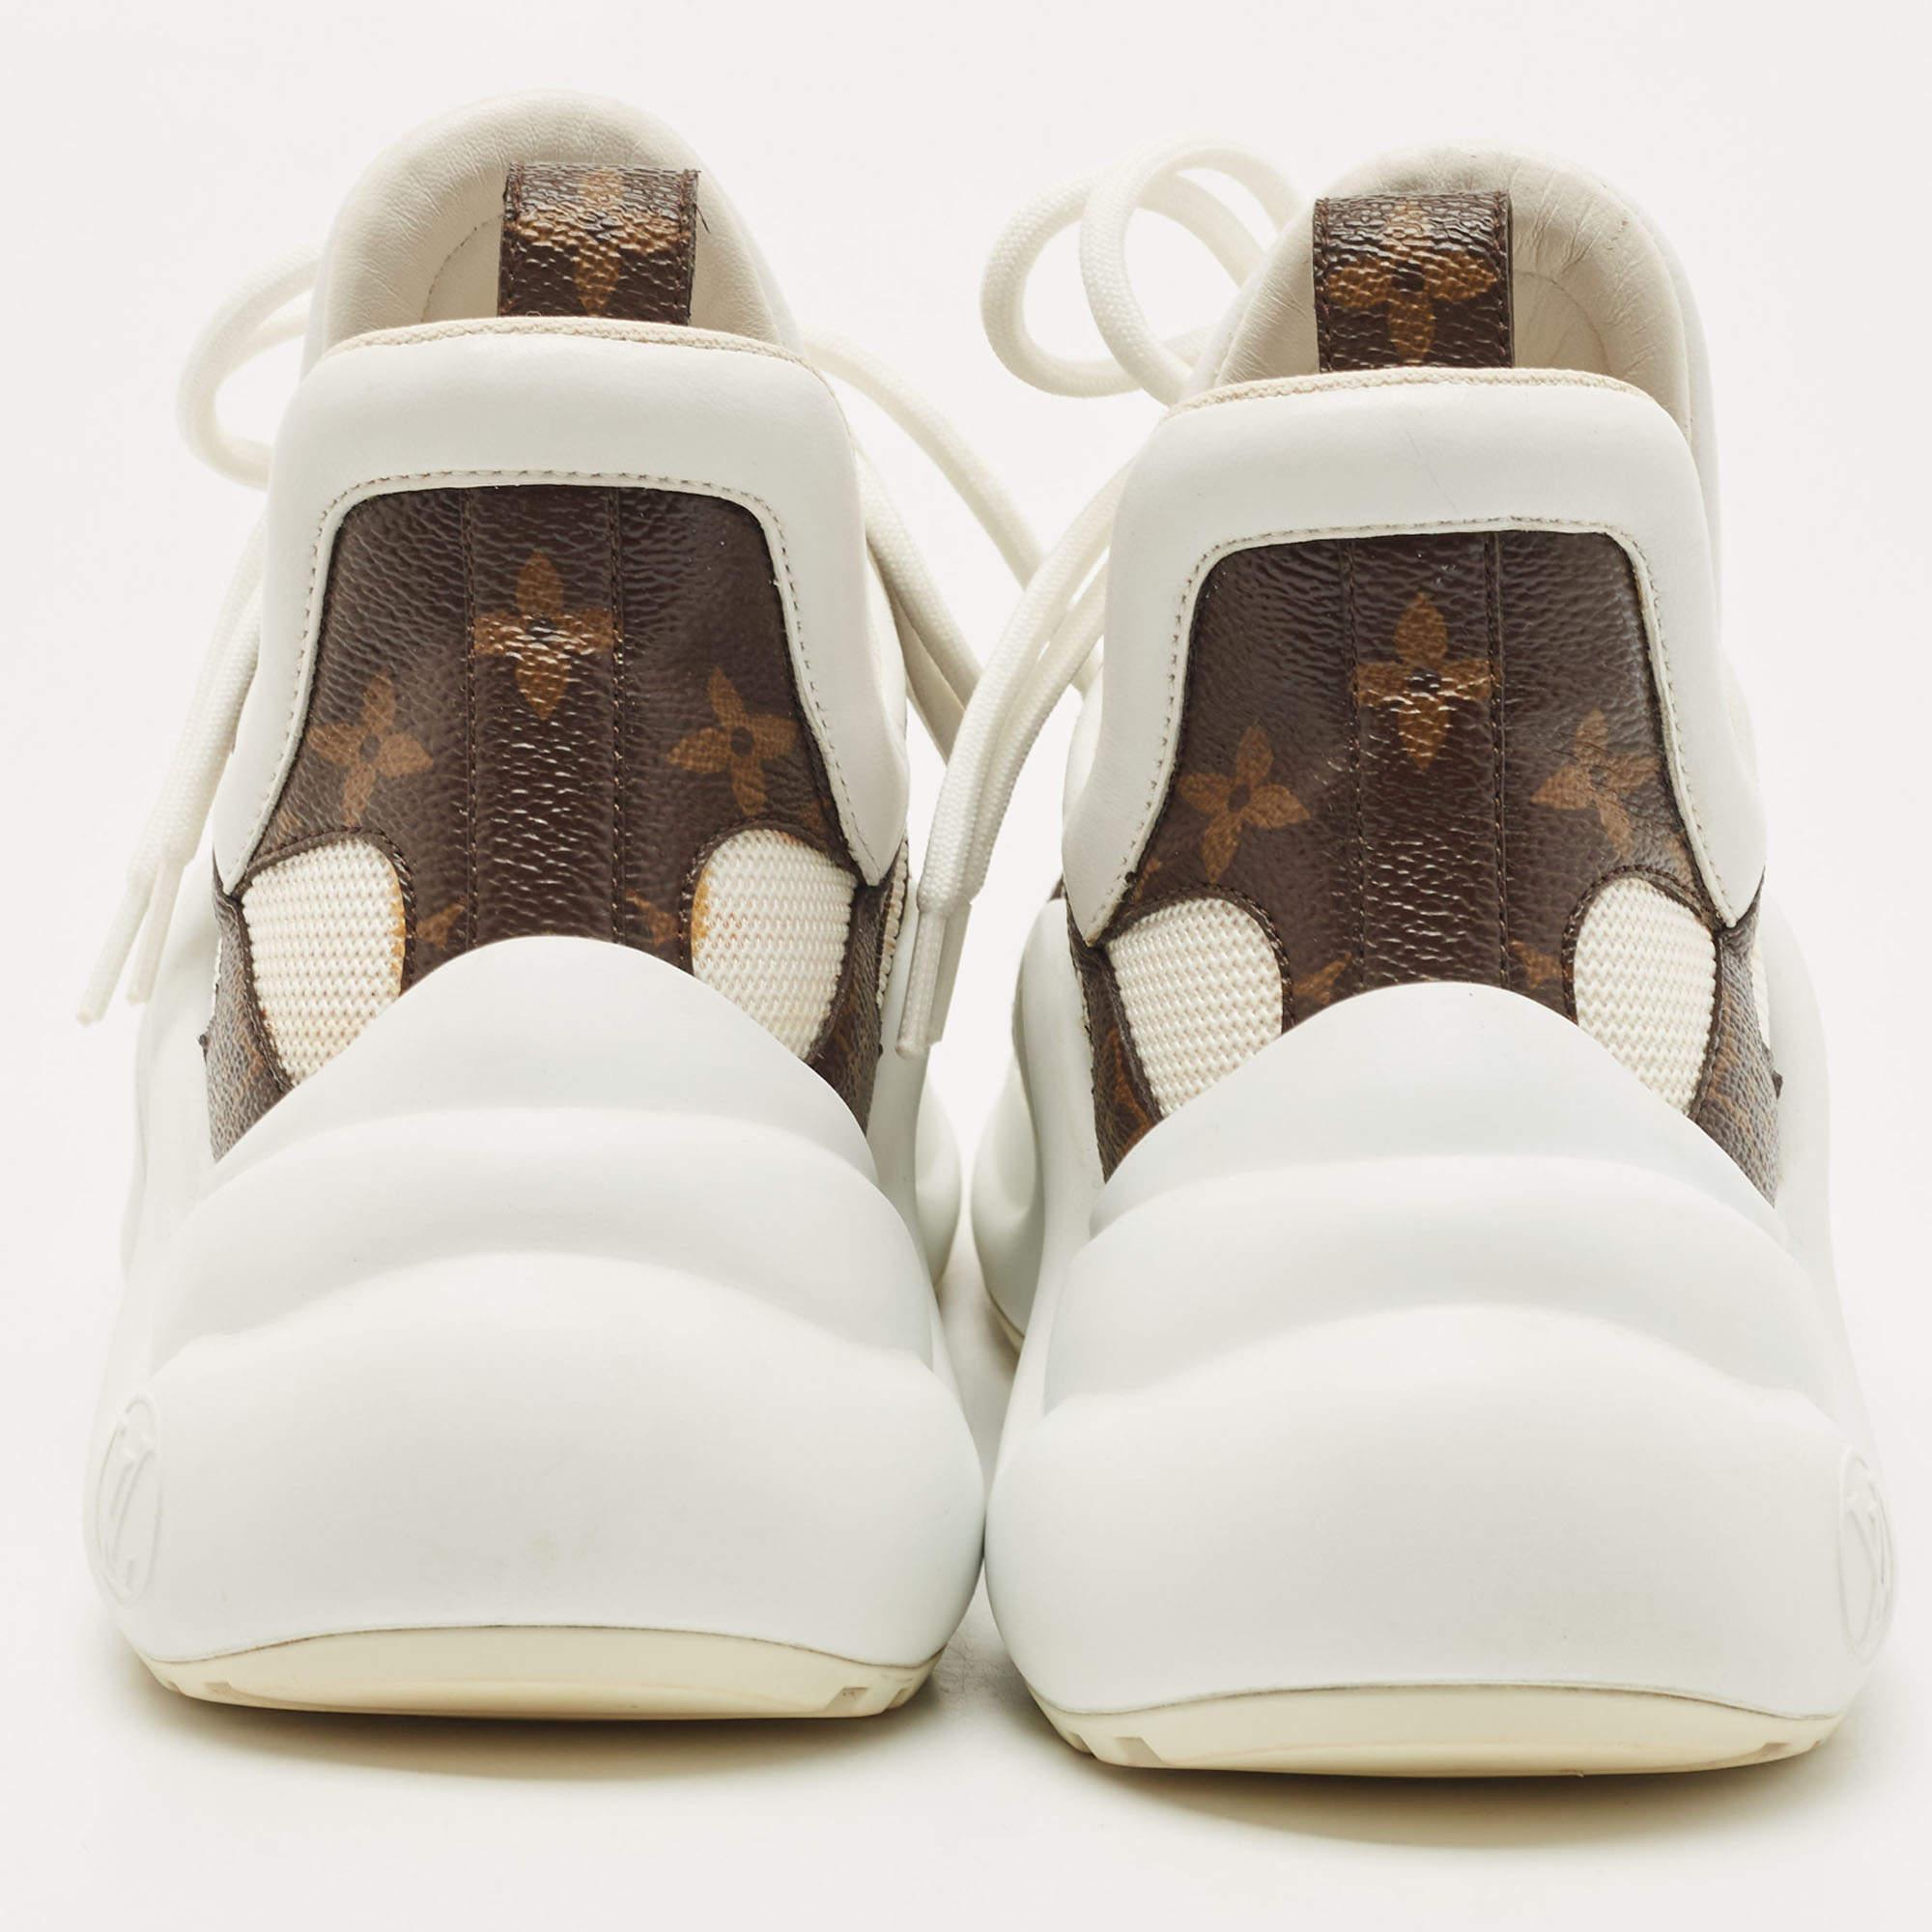 Louis Vuitton White/Monogram Canvas and Leather Archlight Sneakers Size 37 1